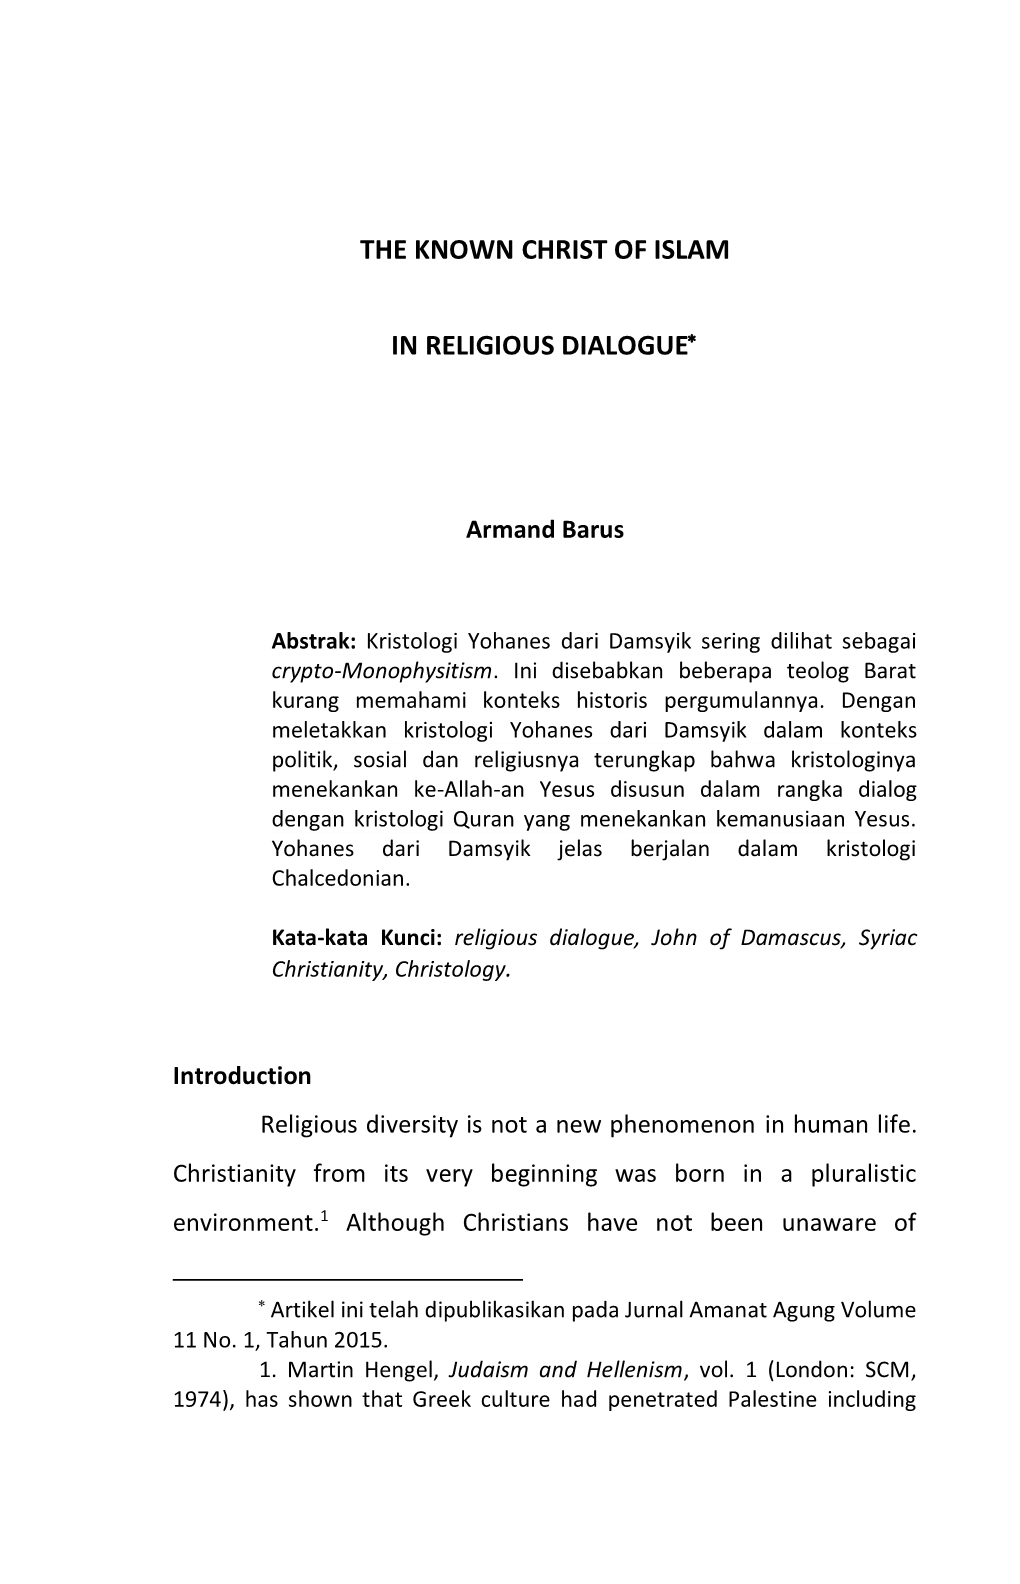 The Known Christ of Islam in Religious Dialogue